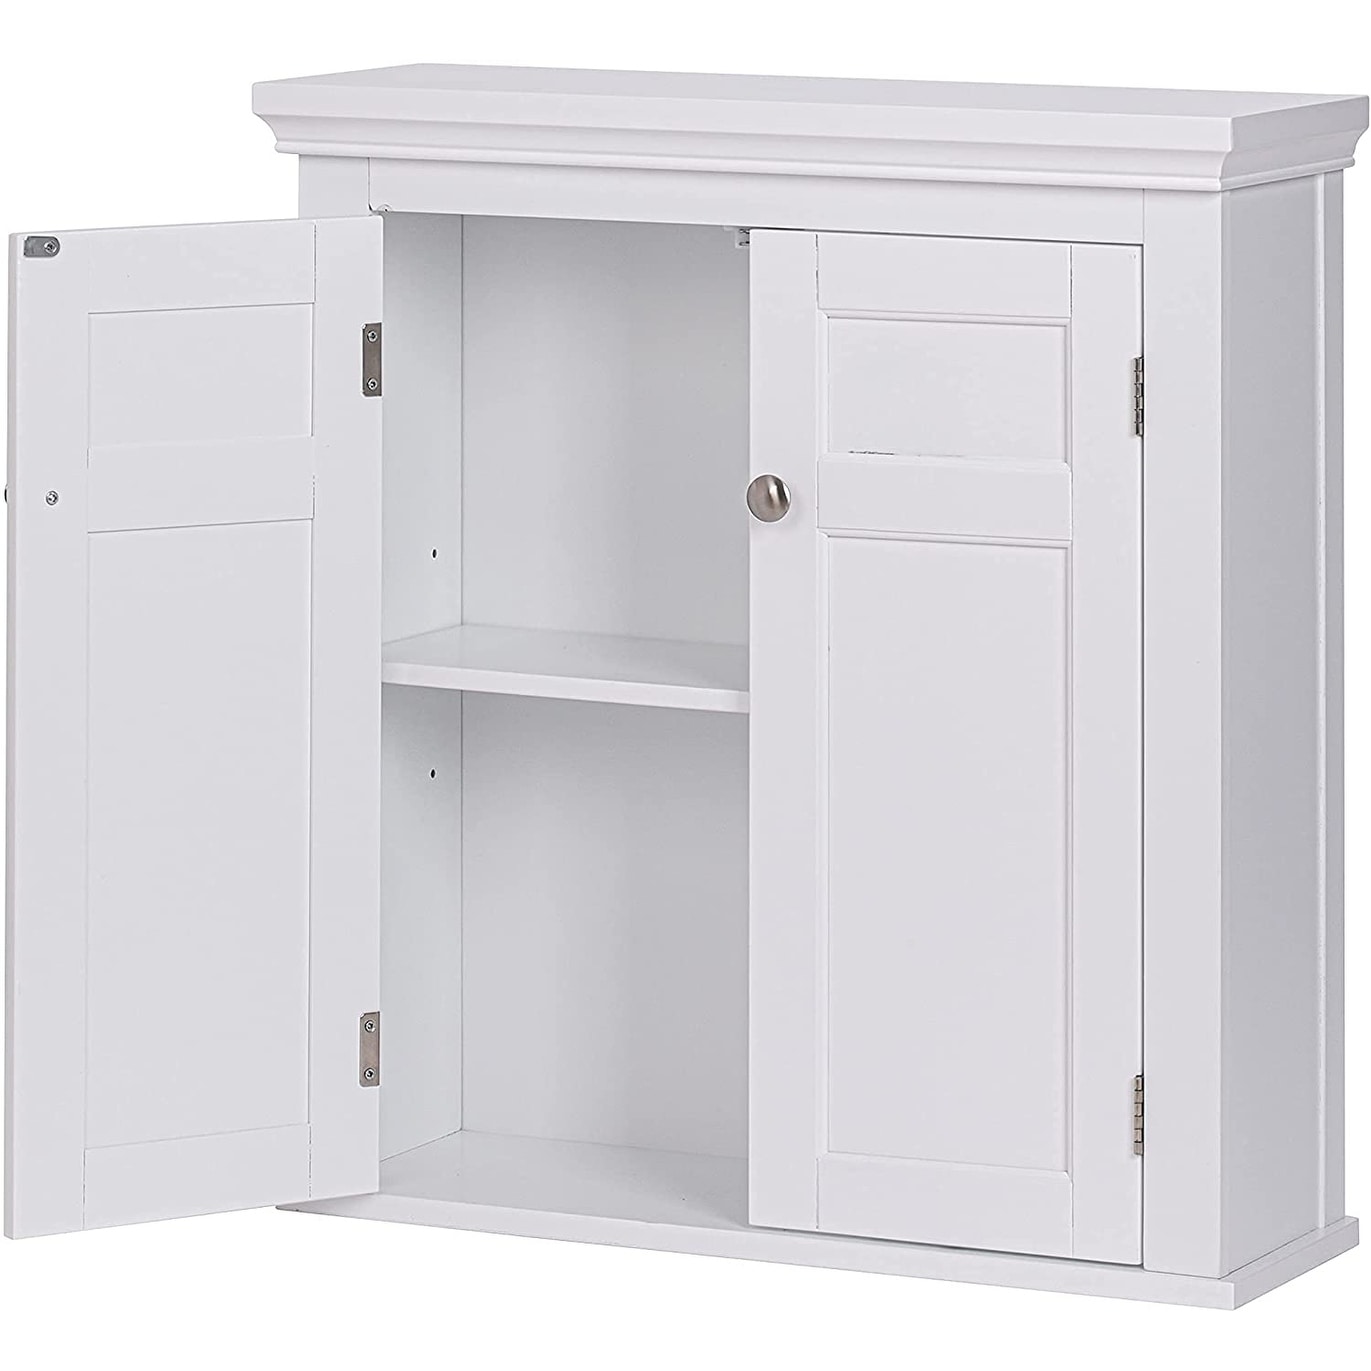 https://ak1.ostkcdn.com/images/products/is/images/direct/3bf6f03e3d4febd65a42e828584ad772df331829/Spirich-Home-Bathroom-Cabinet-Wall-Mounted-with-Doors-and-Shelves%2C-2-Doors-Shuttered-Wall-Cabinet%2C-Bathroom-Wall-Cabinet%2C-White.jpg